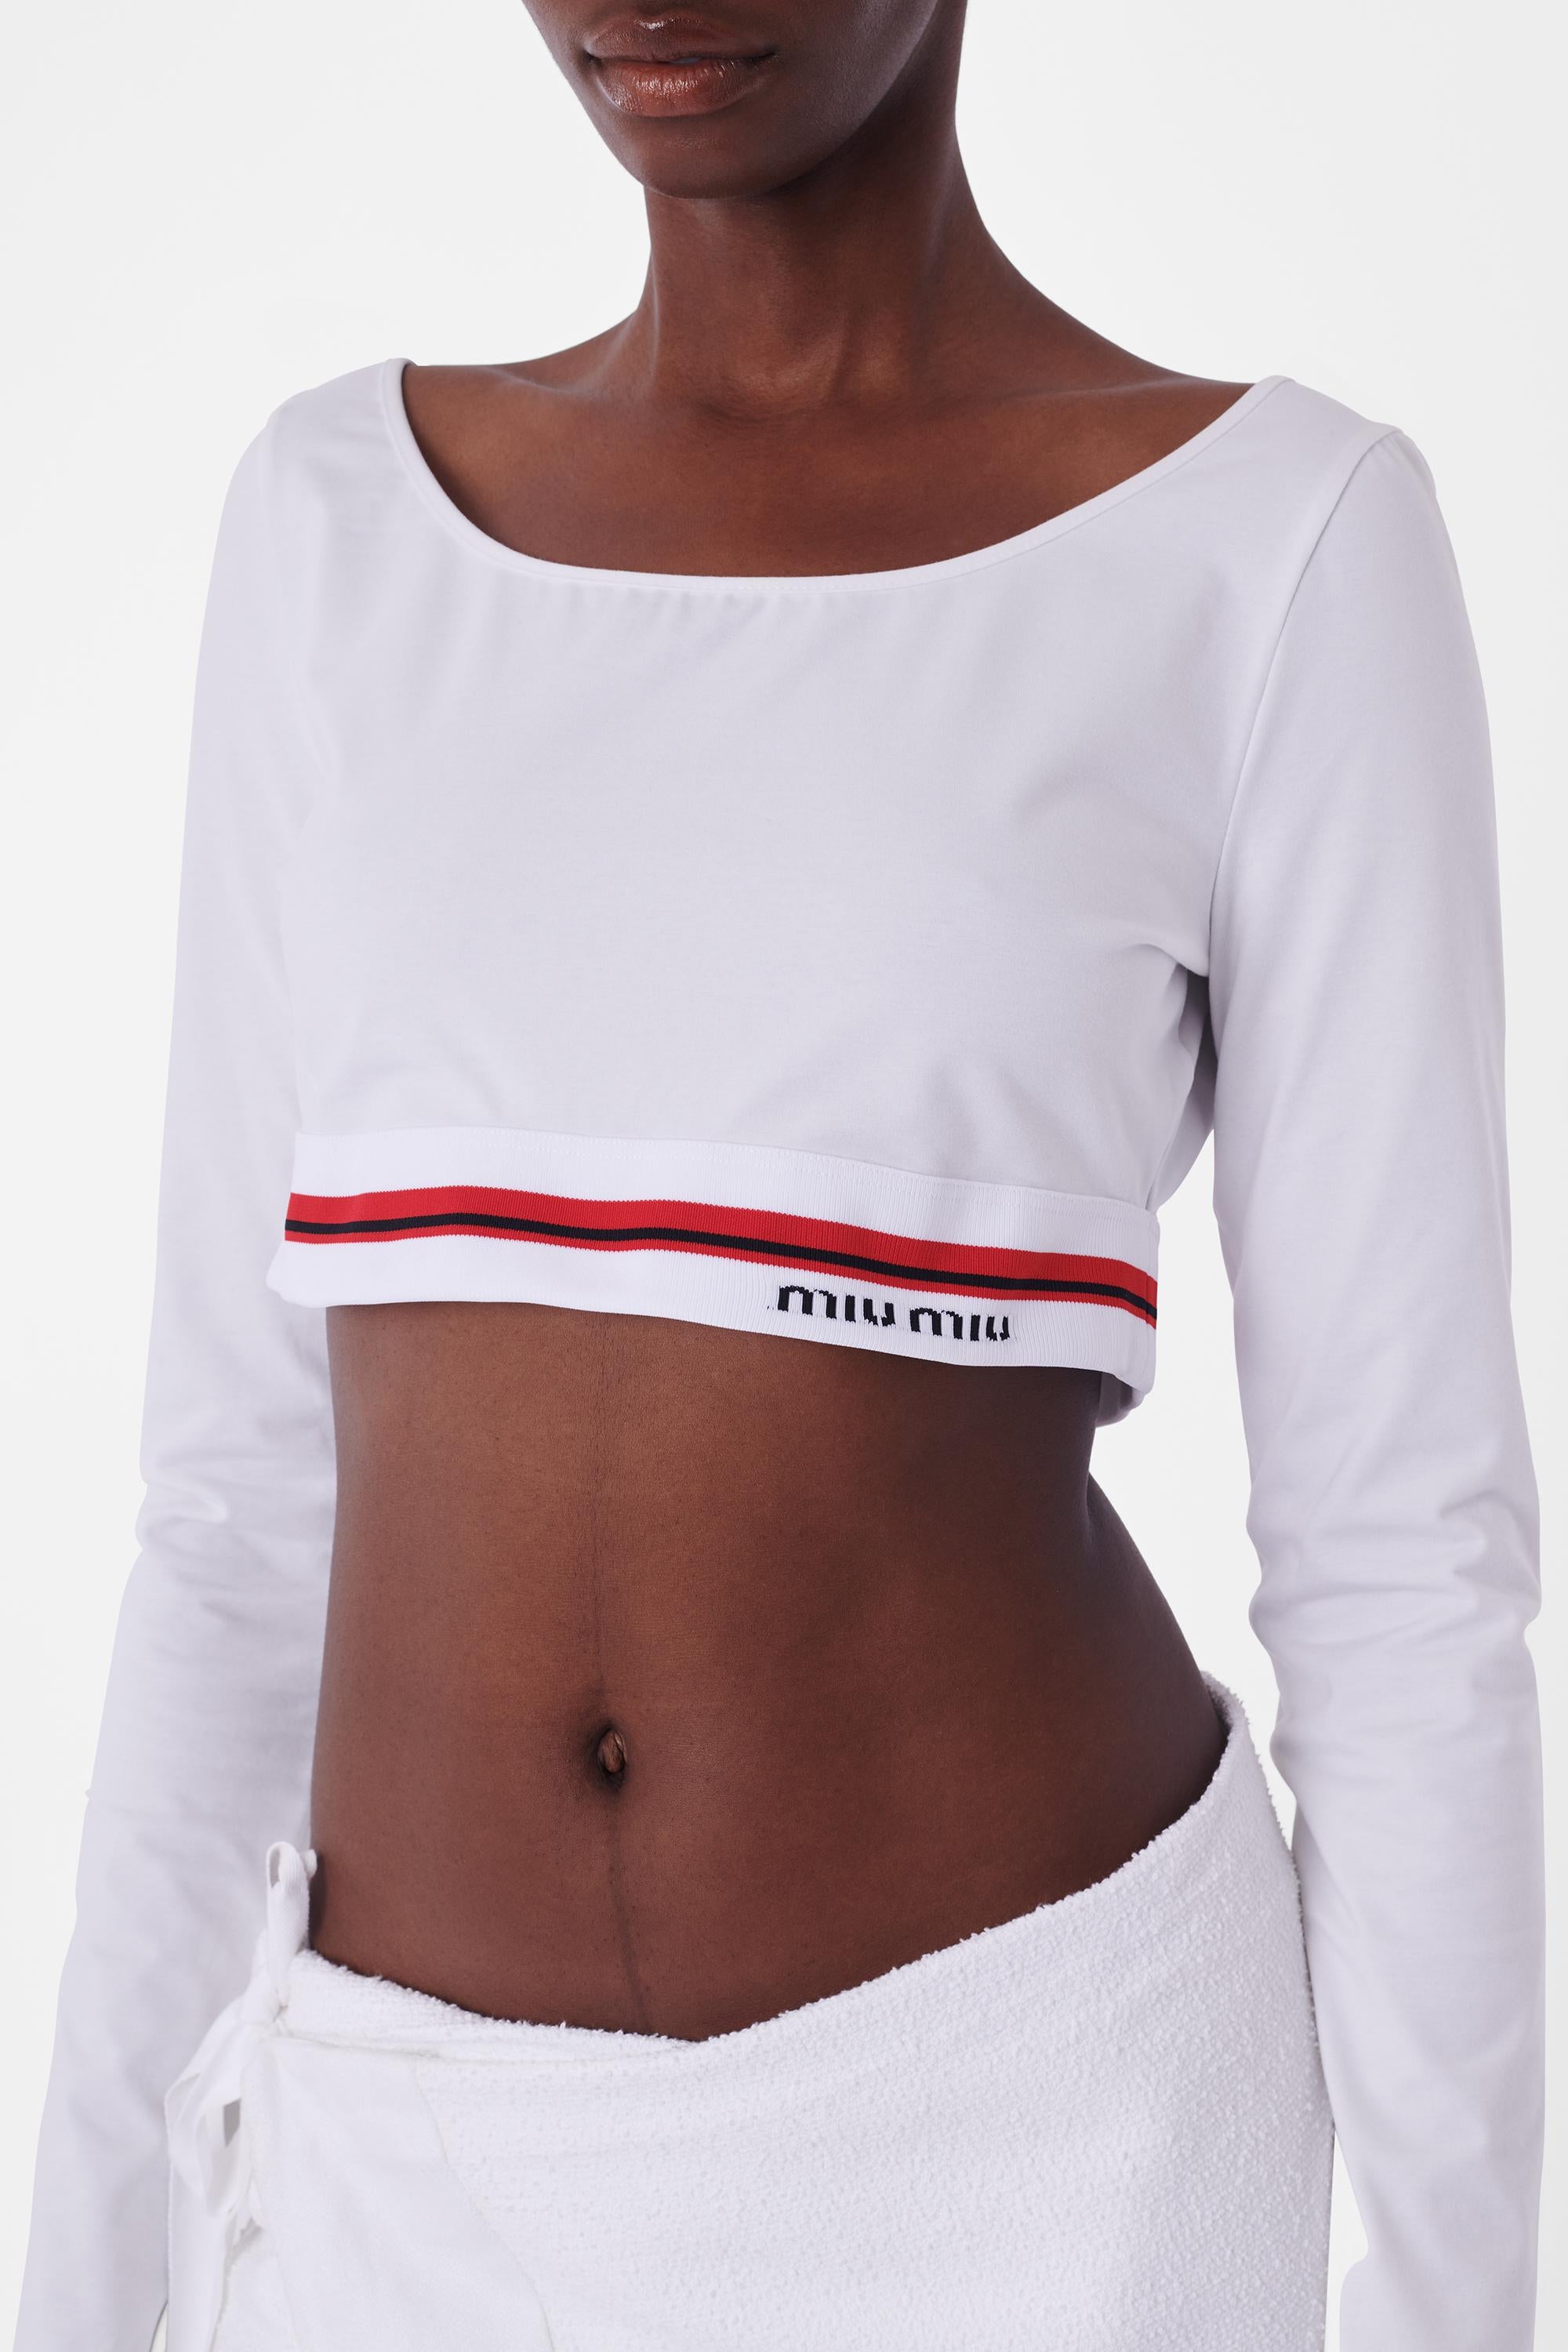 Miu Miu 2021 Cropped White Top In Excellent Condition For Sale In London, GB